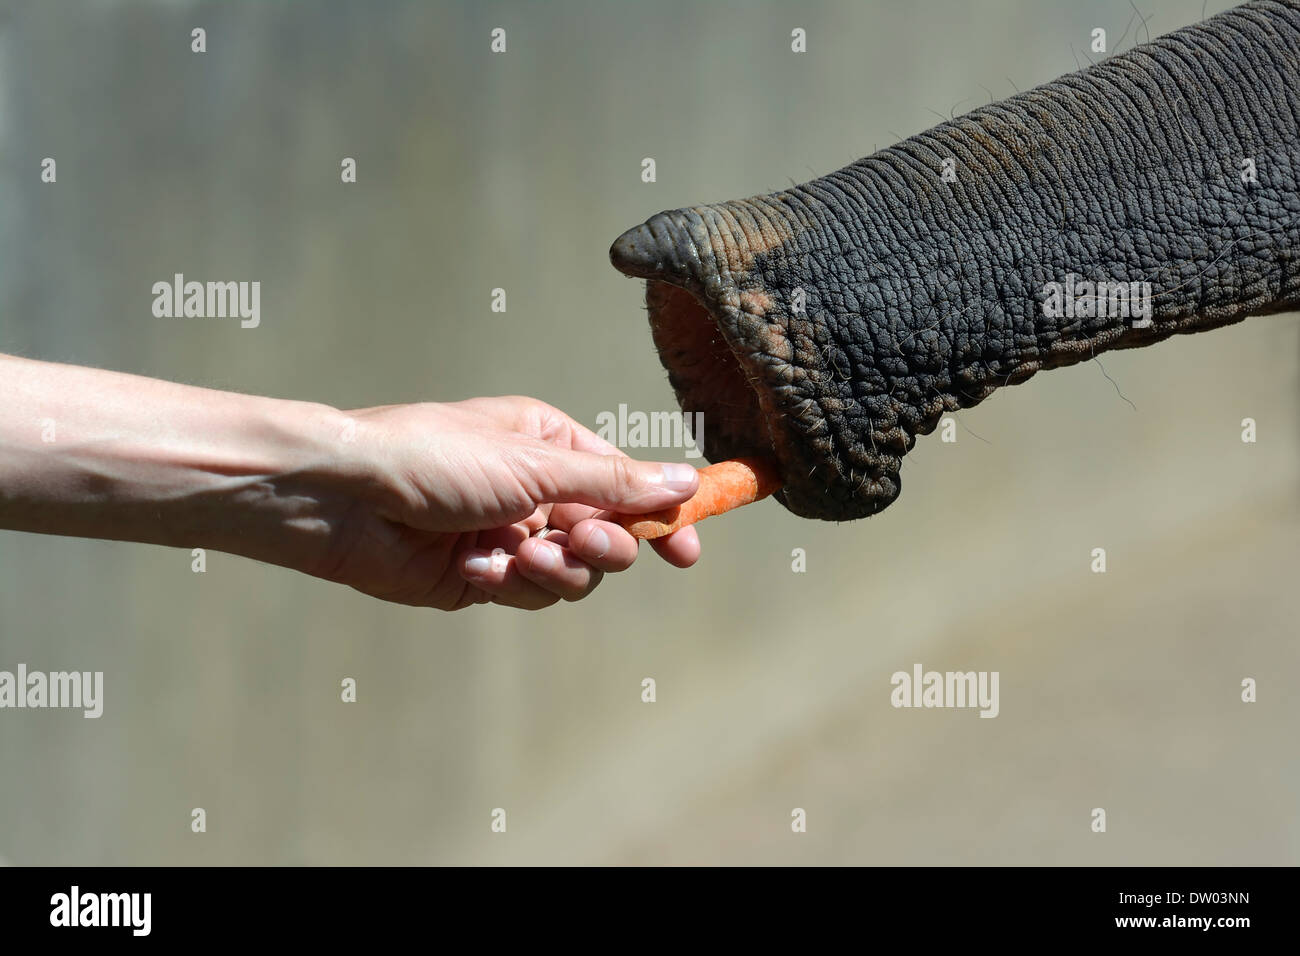 Asian Elephant (Elephas maximus) is fed with a carrot, Cologne Zoo, Cologne, North Rhine-Westphalia, Germany Stock Photo